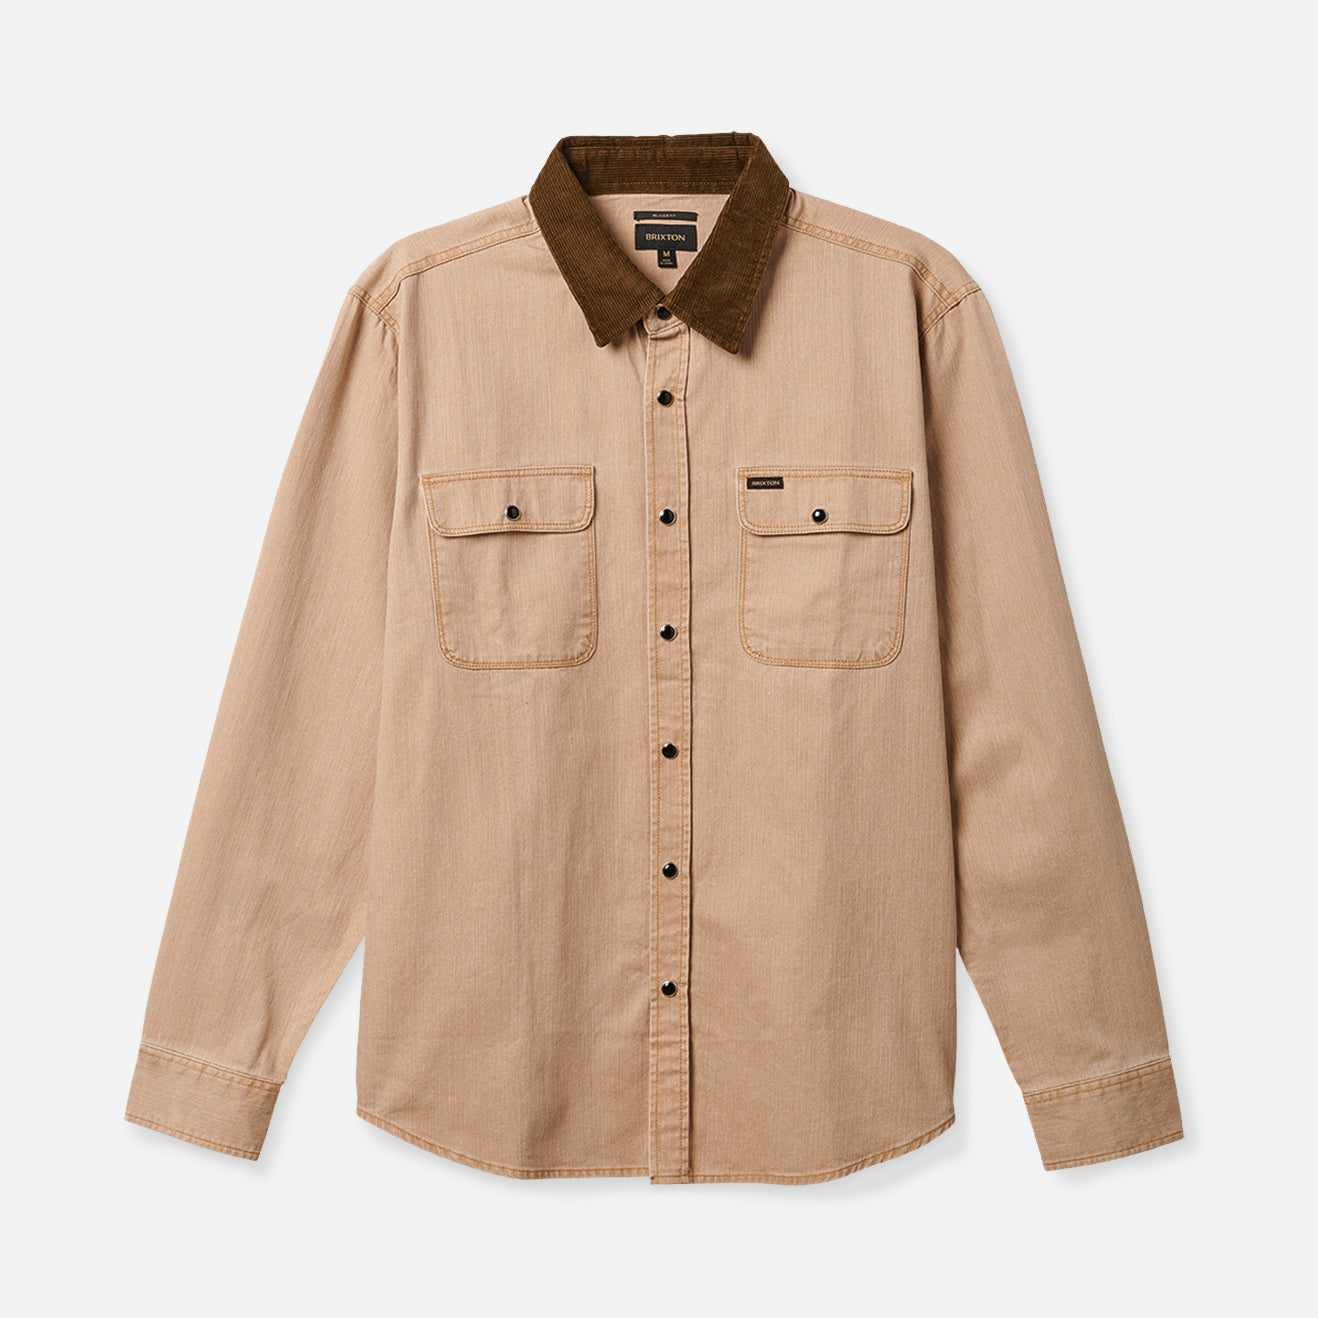 BRIXTON Bowery Reserve Long Sleeve Button Up Mojave Men's Long Sleeve Button Up Shirts Brixton M 